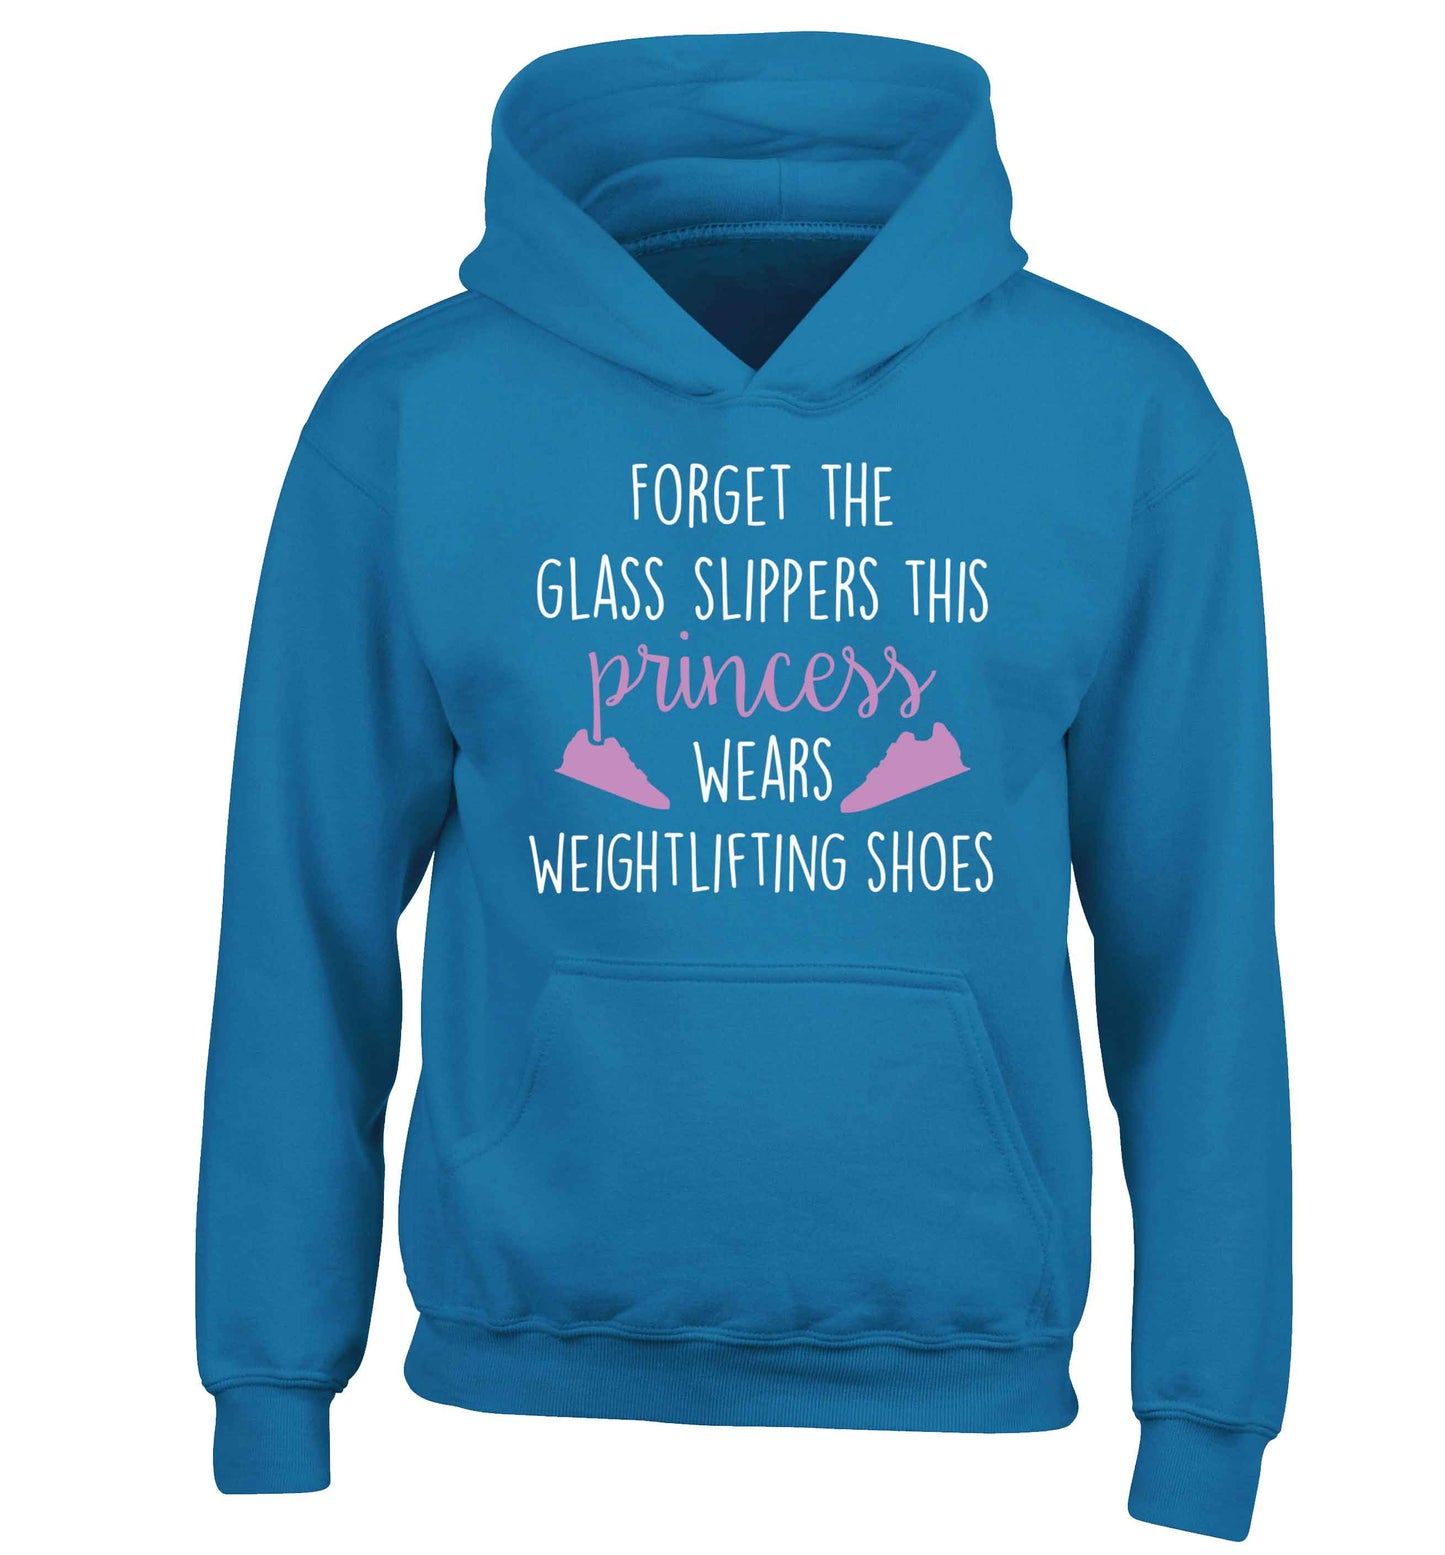 Forget the glass slippers this princess wears weightlifting shoes children's blue hoodie 12-13 Years